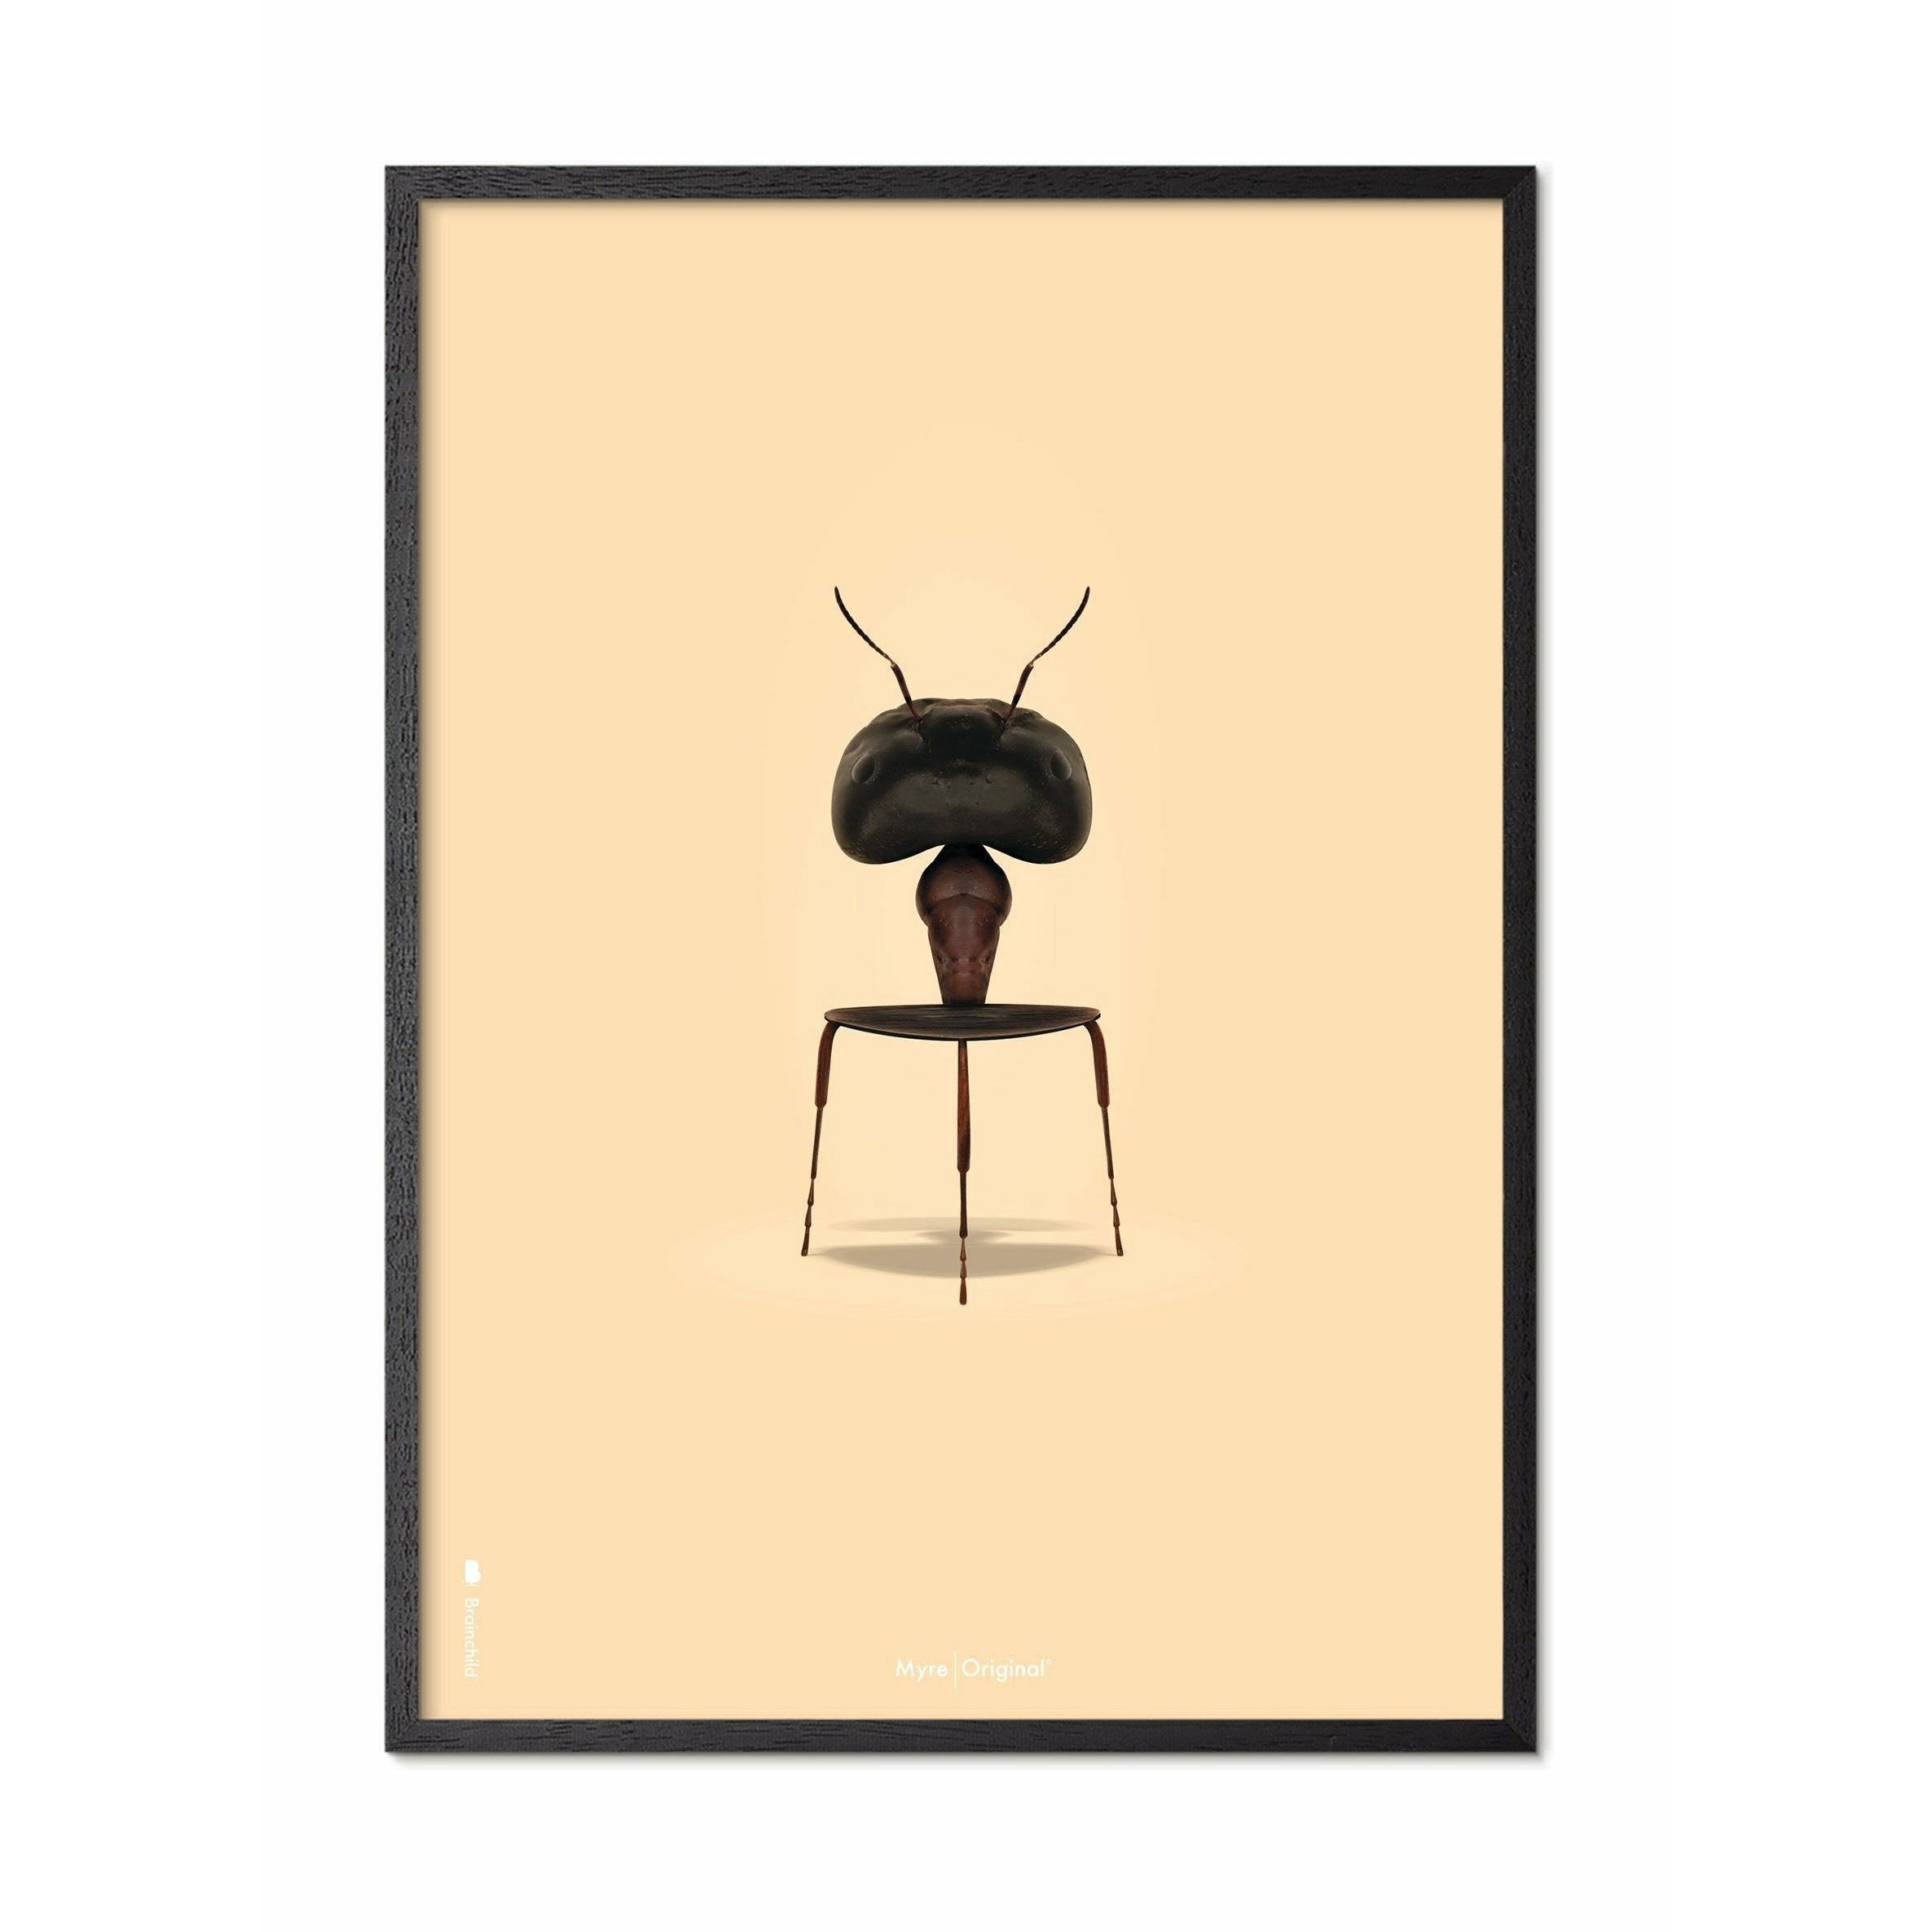 Brainchild Ant Classic Poster, Frame In Black Lacquered Wood A5, Sand Colored Background